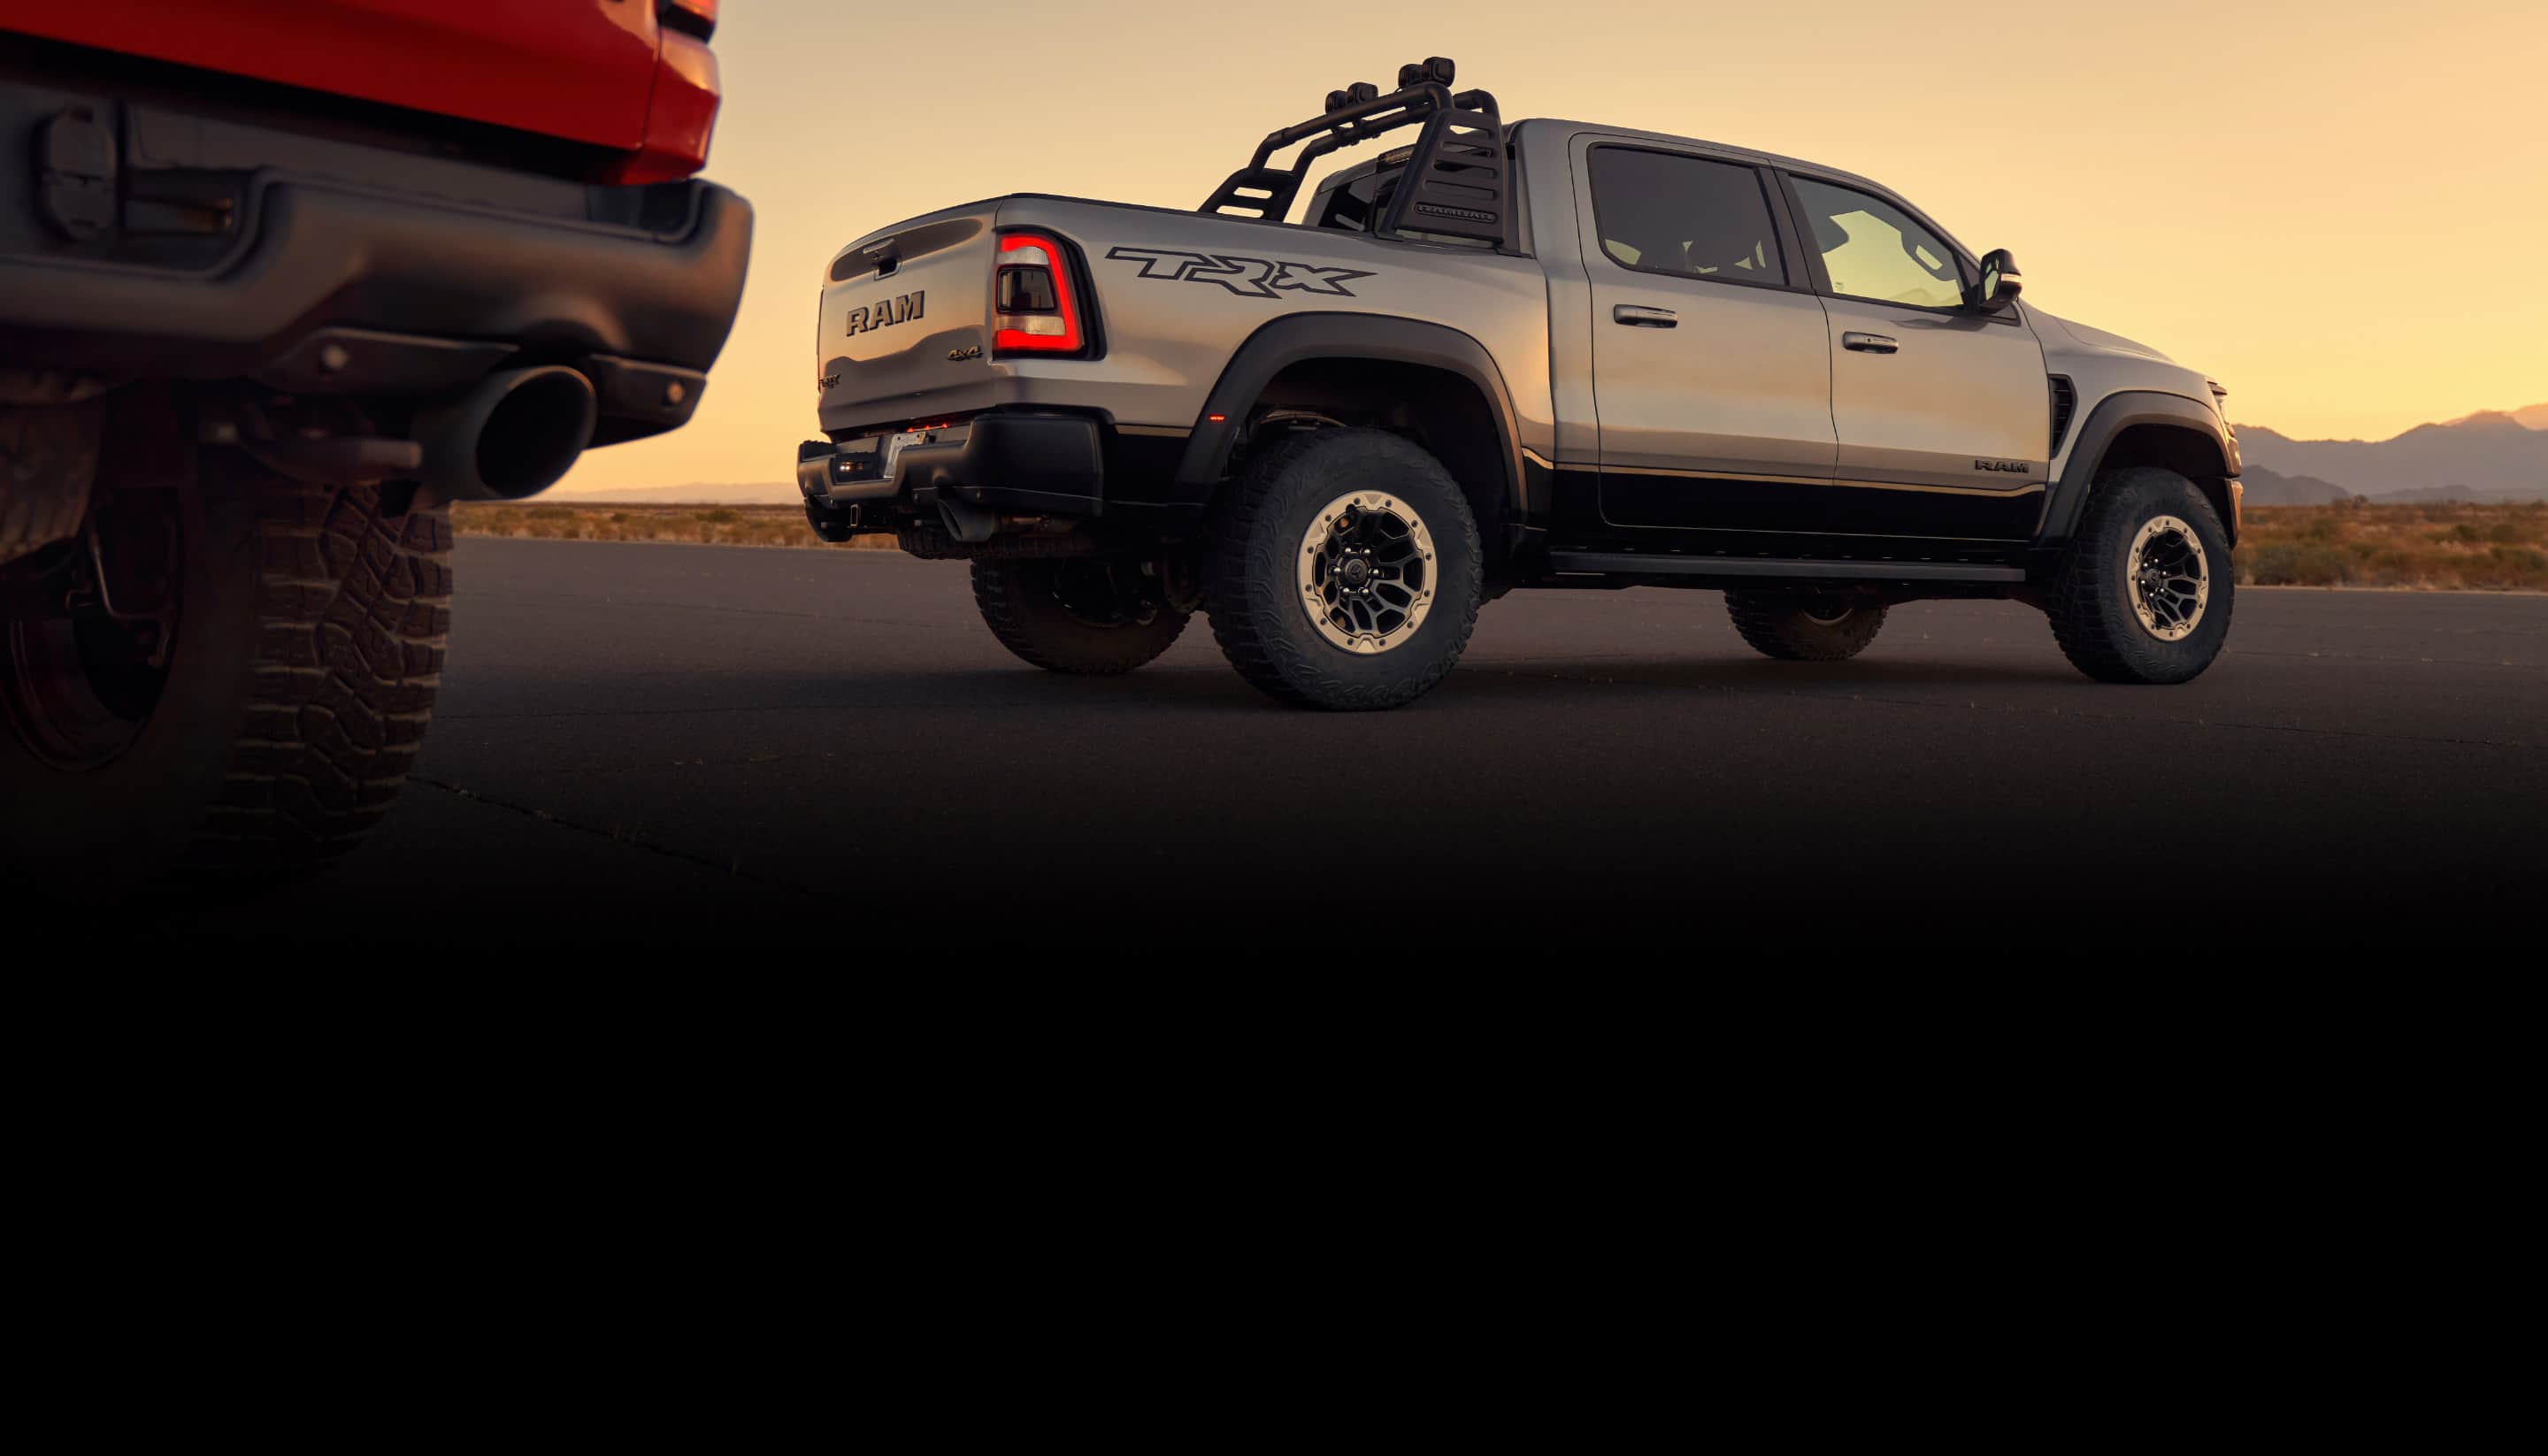 A silver 2021 Ram 1500 TRX with beadlock capable aluminum wheels and a Rambar by Mopar parked on blacktop at sunset, with the right rear corner of a red 2021 Ram 1500 TRX in the foreground.